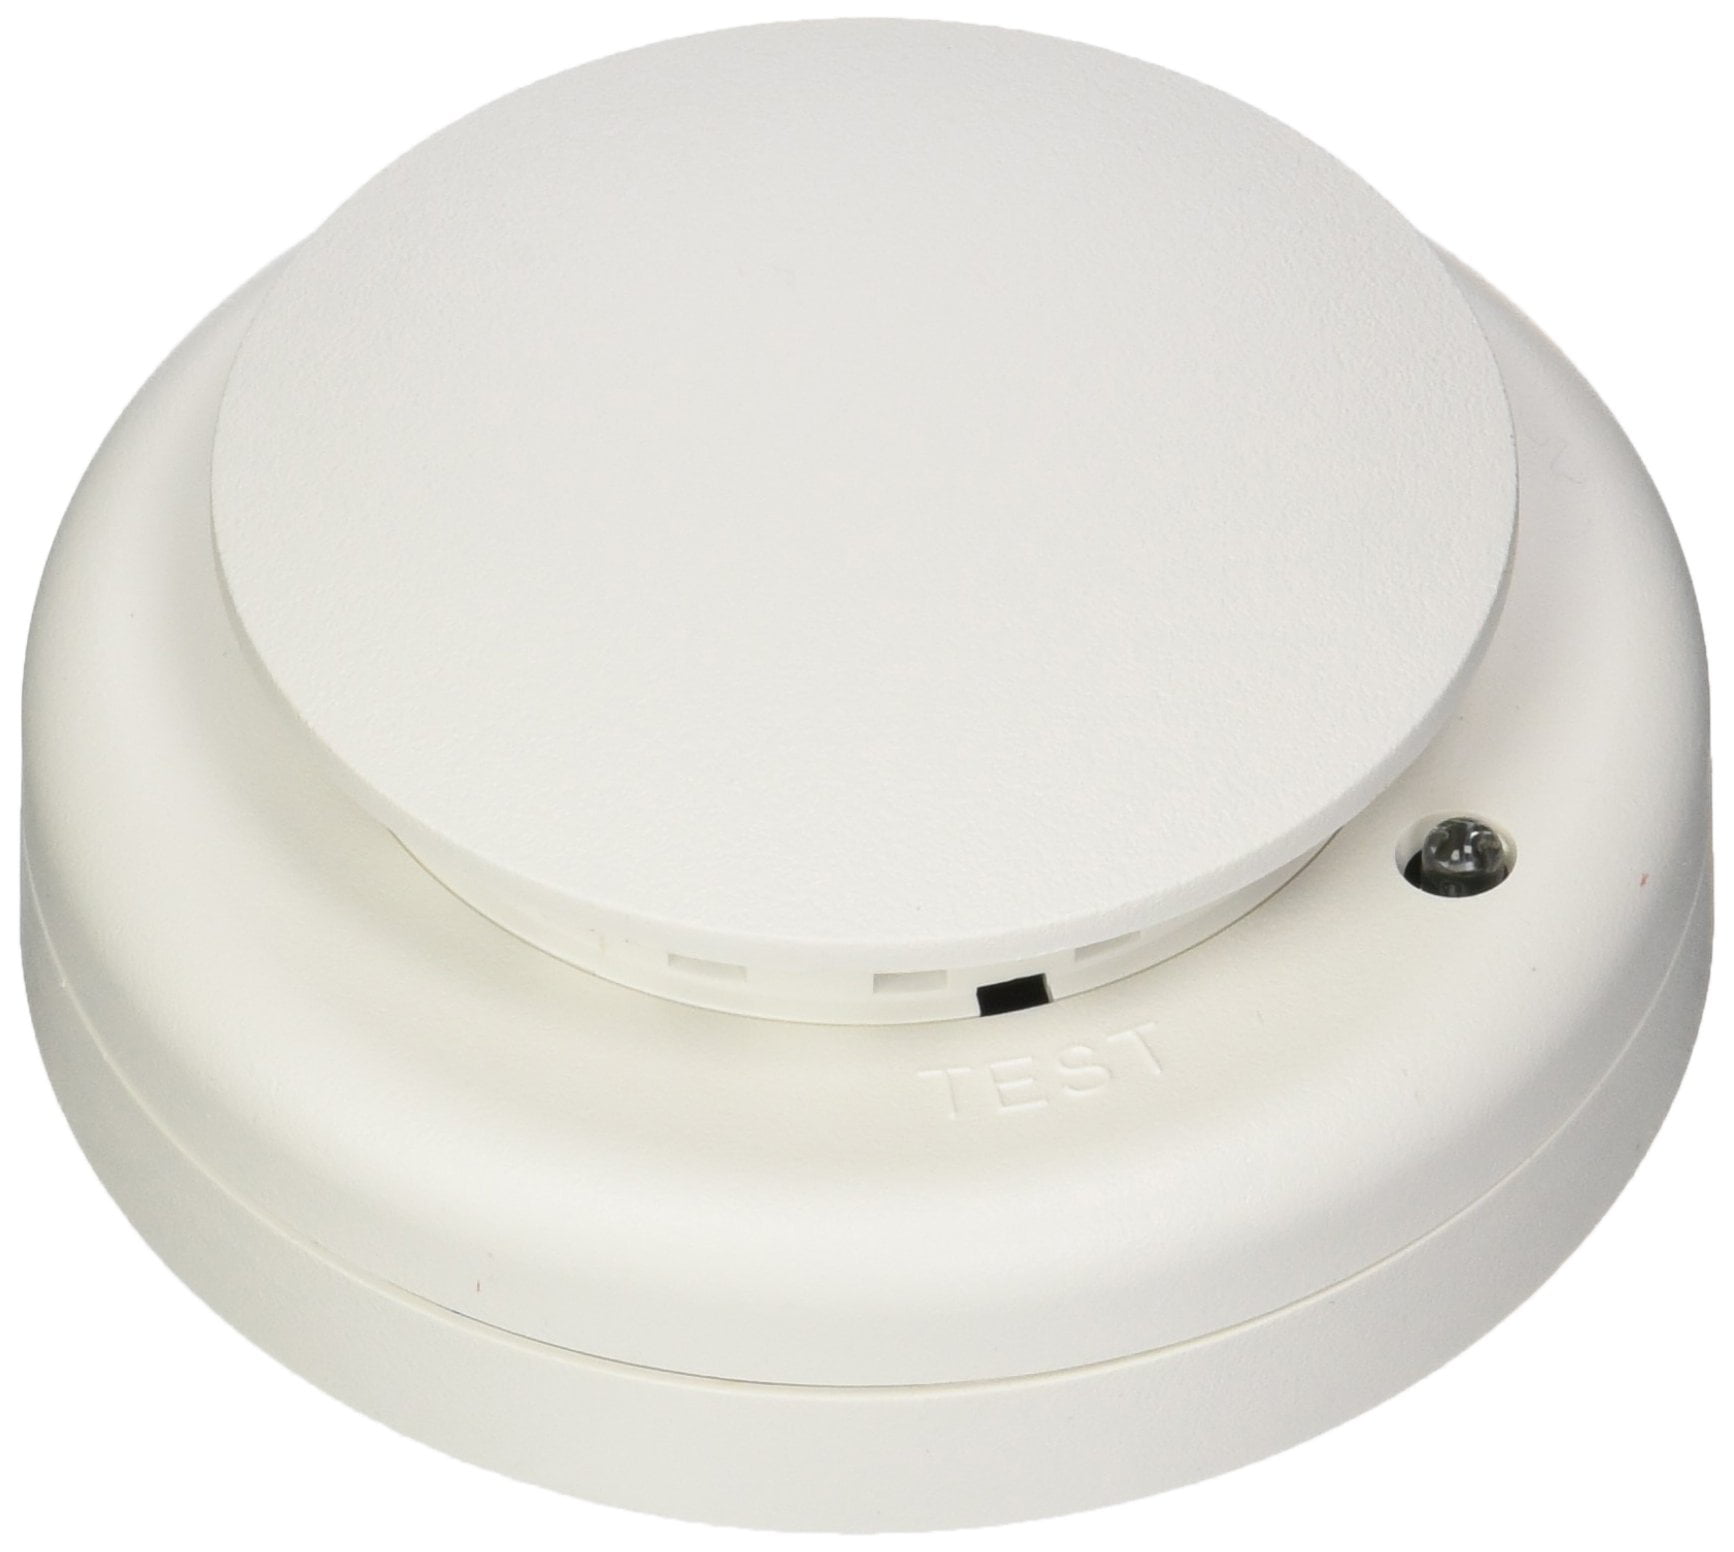 MARETRON SMOKE/HEAT DETECTOR FOR USE WITH THE SIM1 